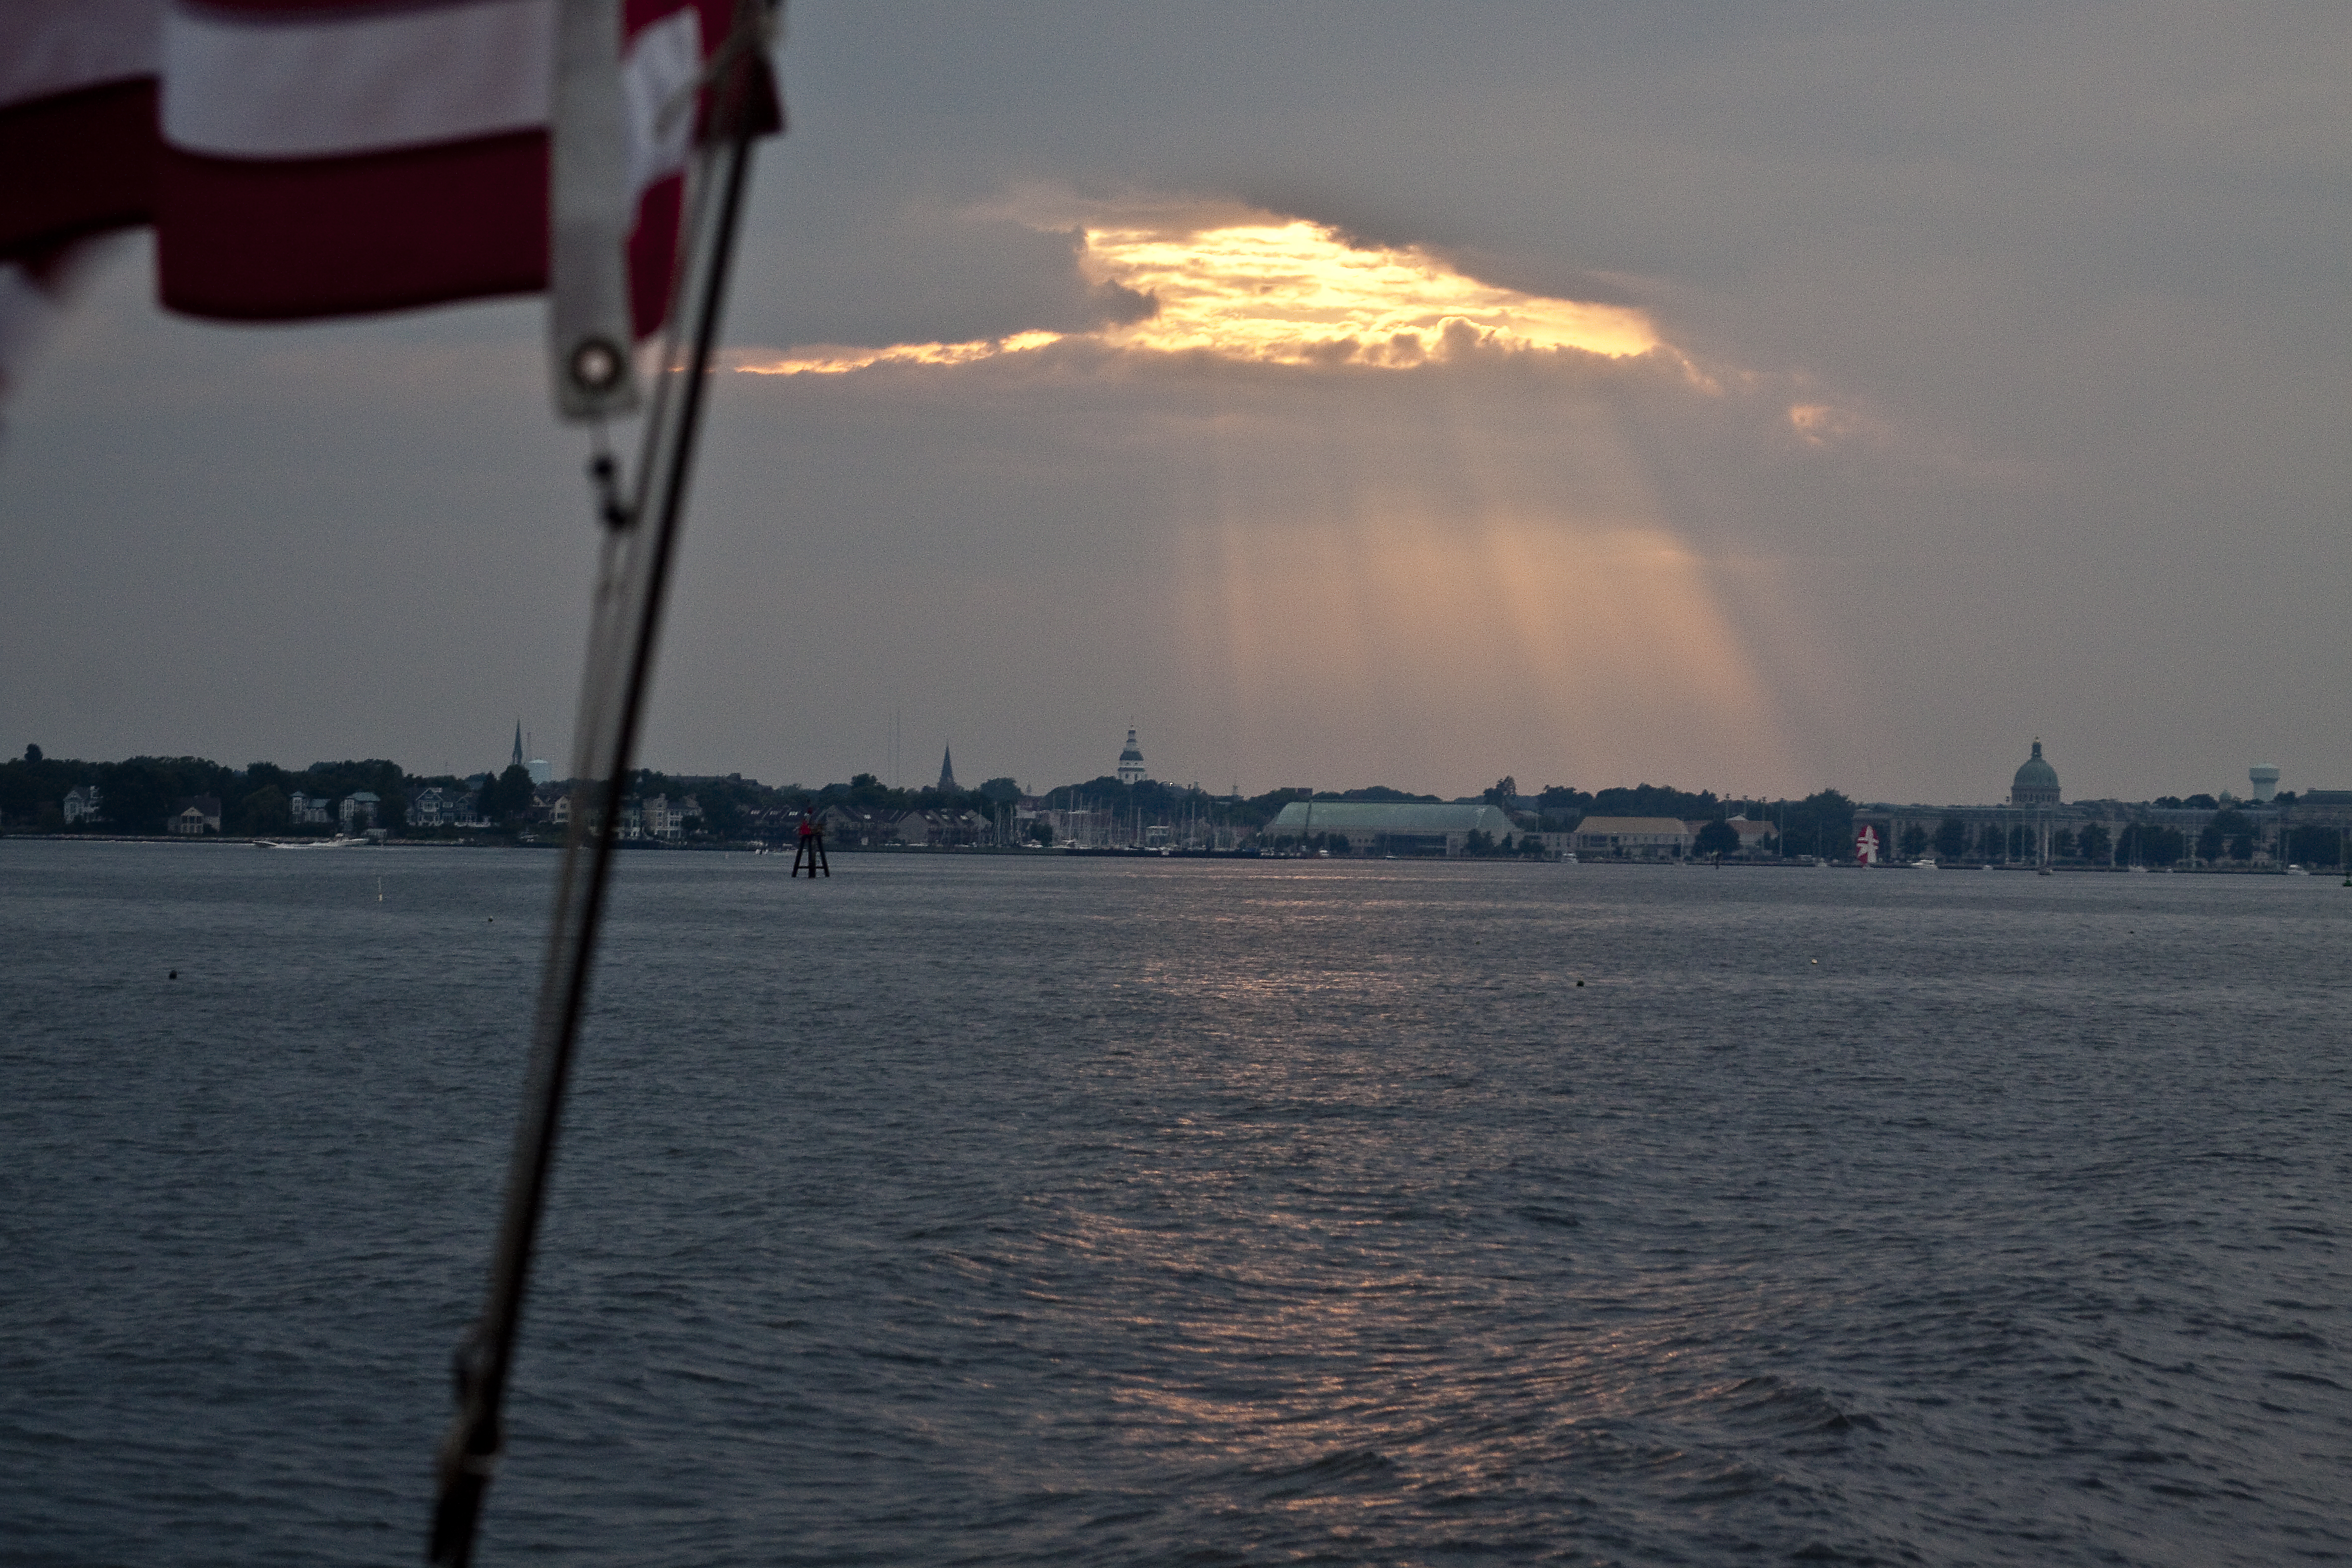 Sun rays shining over Annapolis taken from schooner on the water